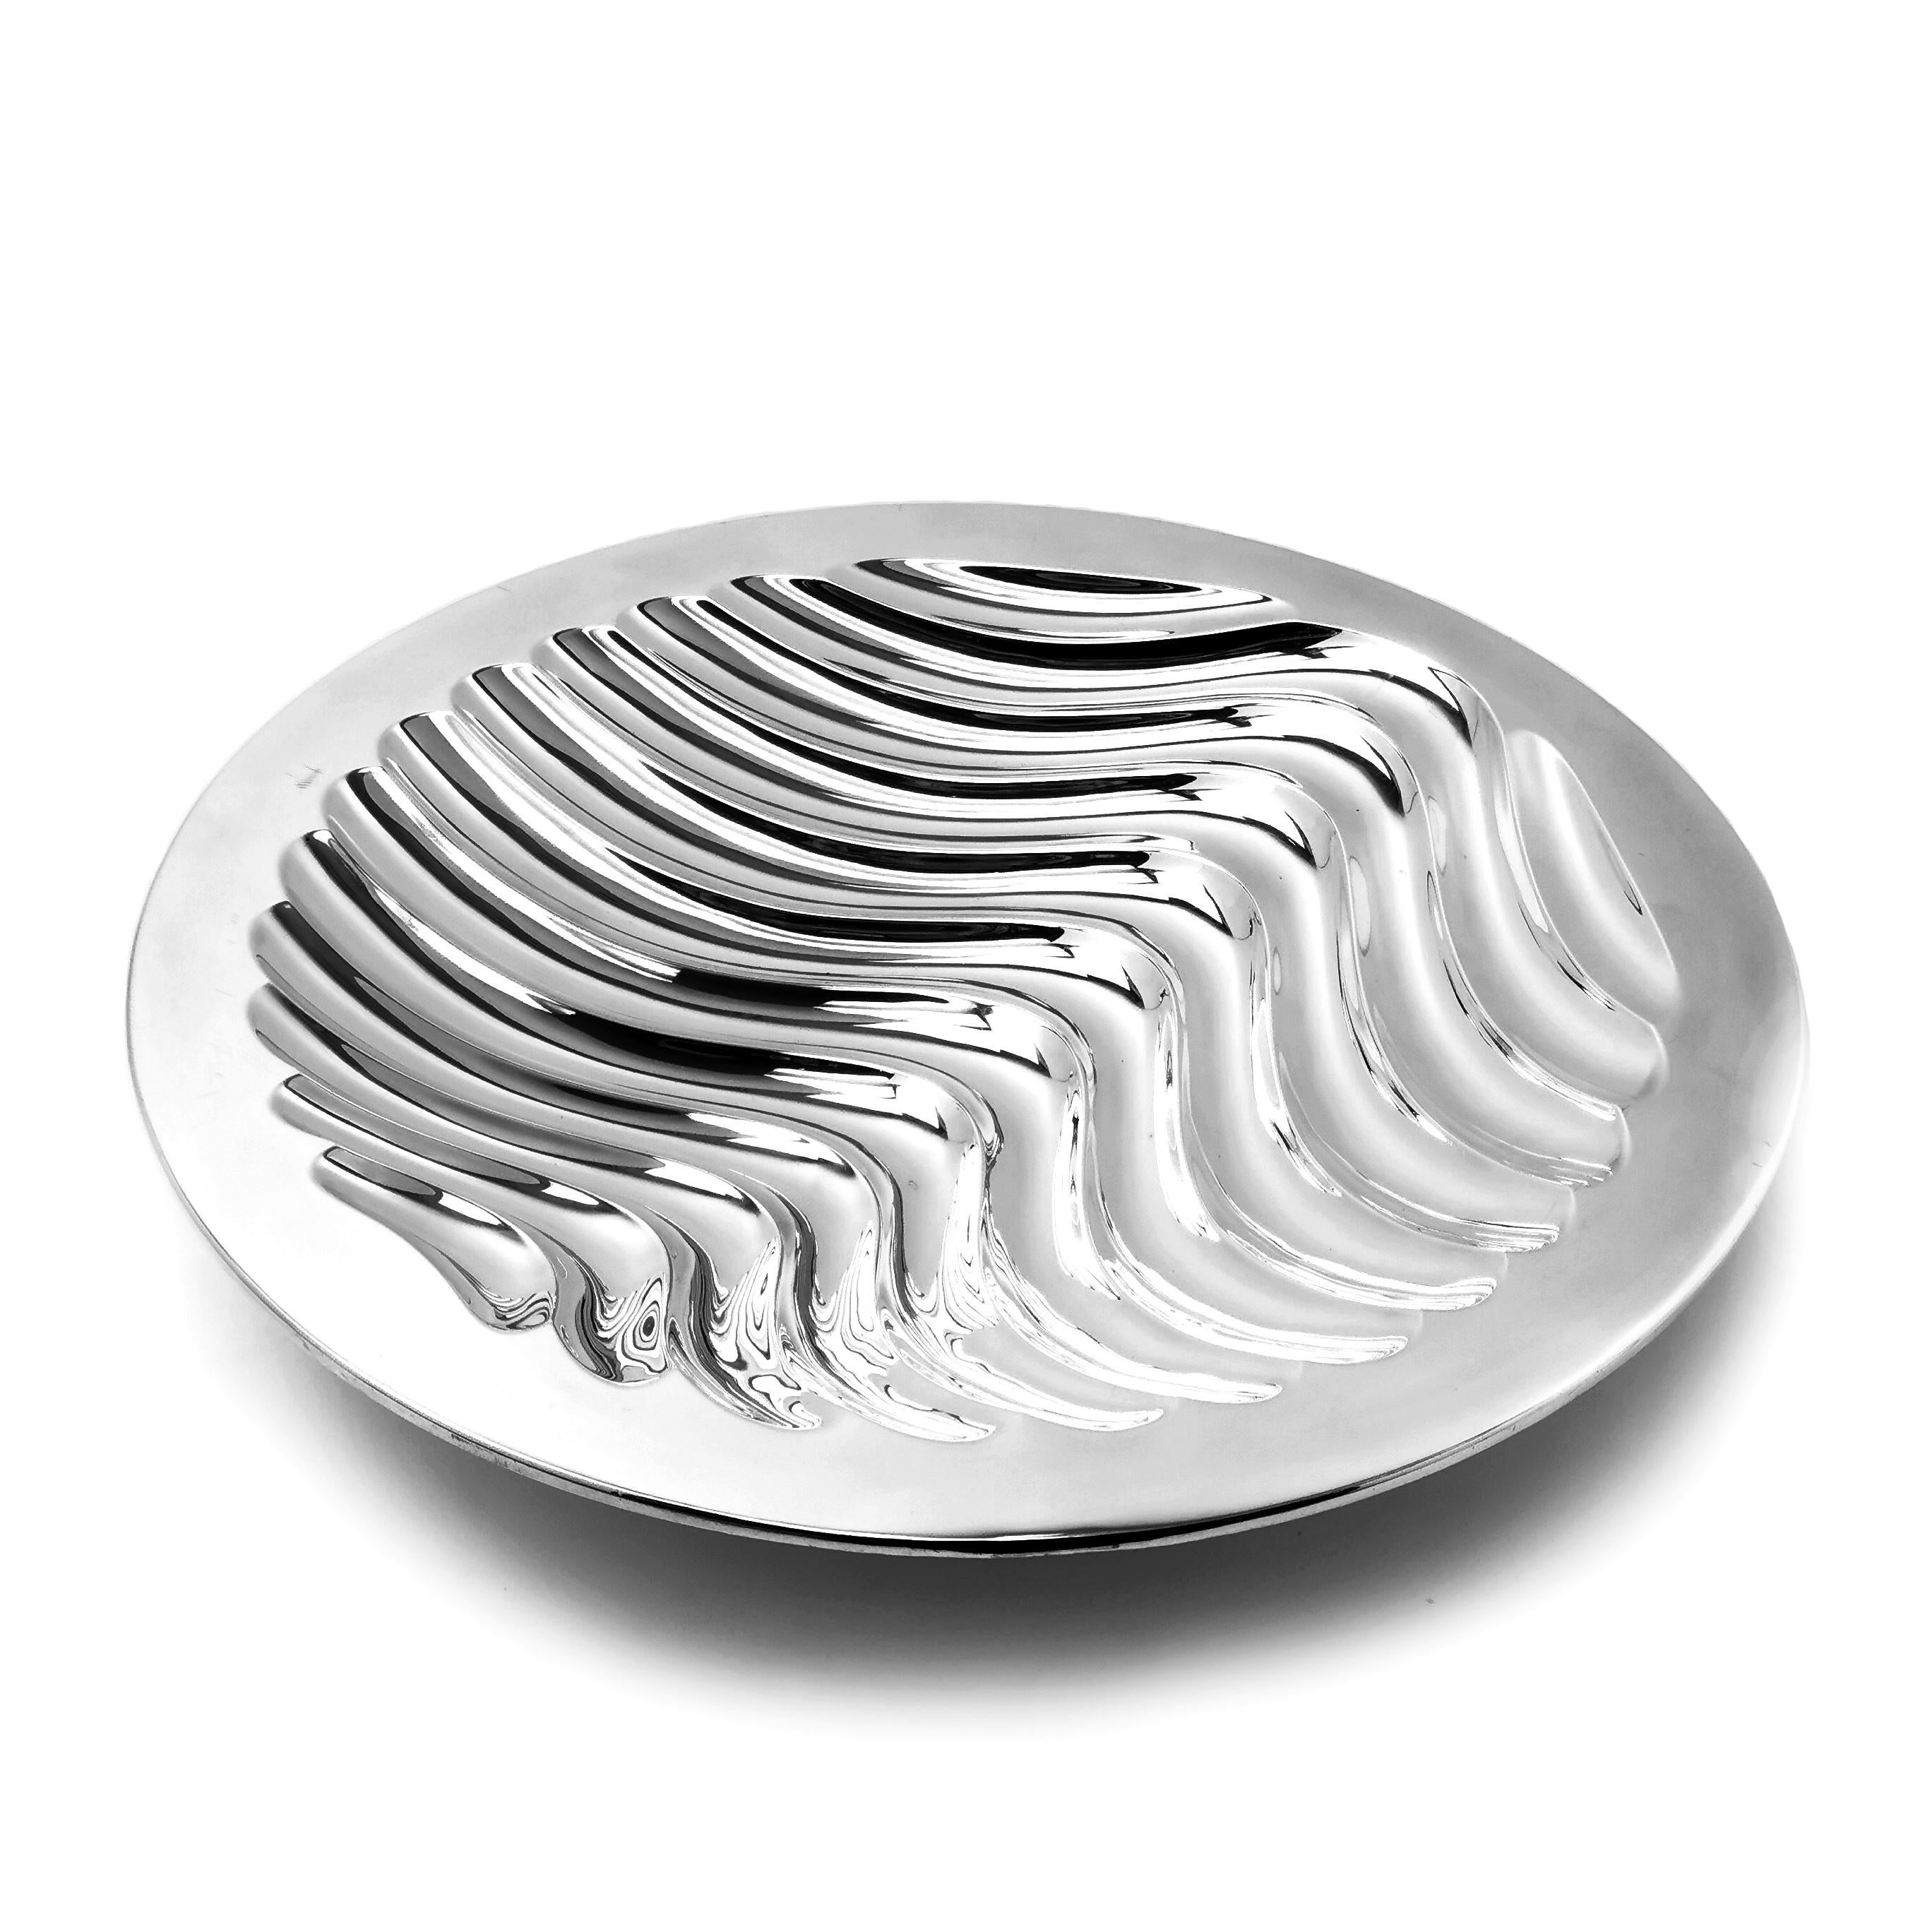 English Contemporary Sterling Silver Bowl Round Double Skinned Wave Alex Brogden 1993 For Sale